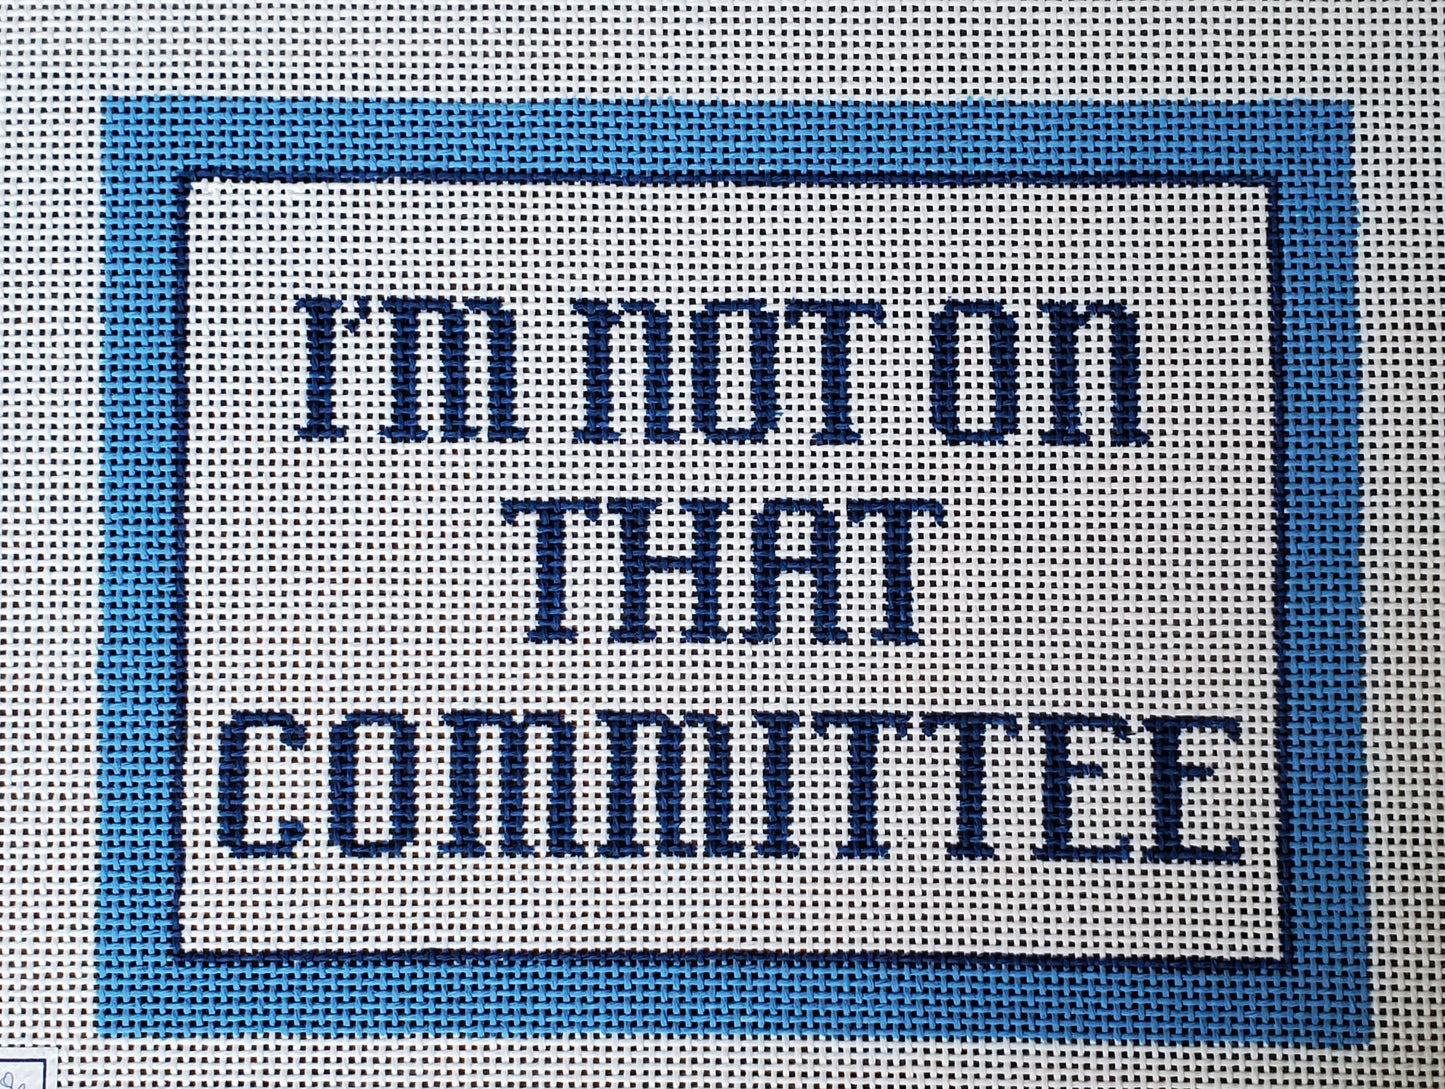 I'm Not on That Committee - The Flying Needles